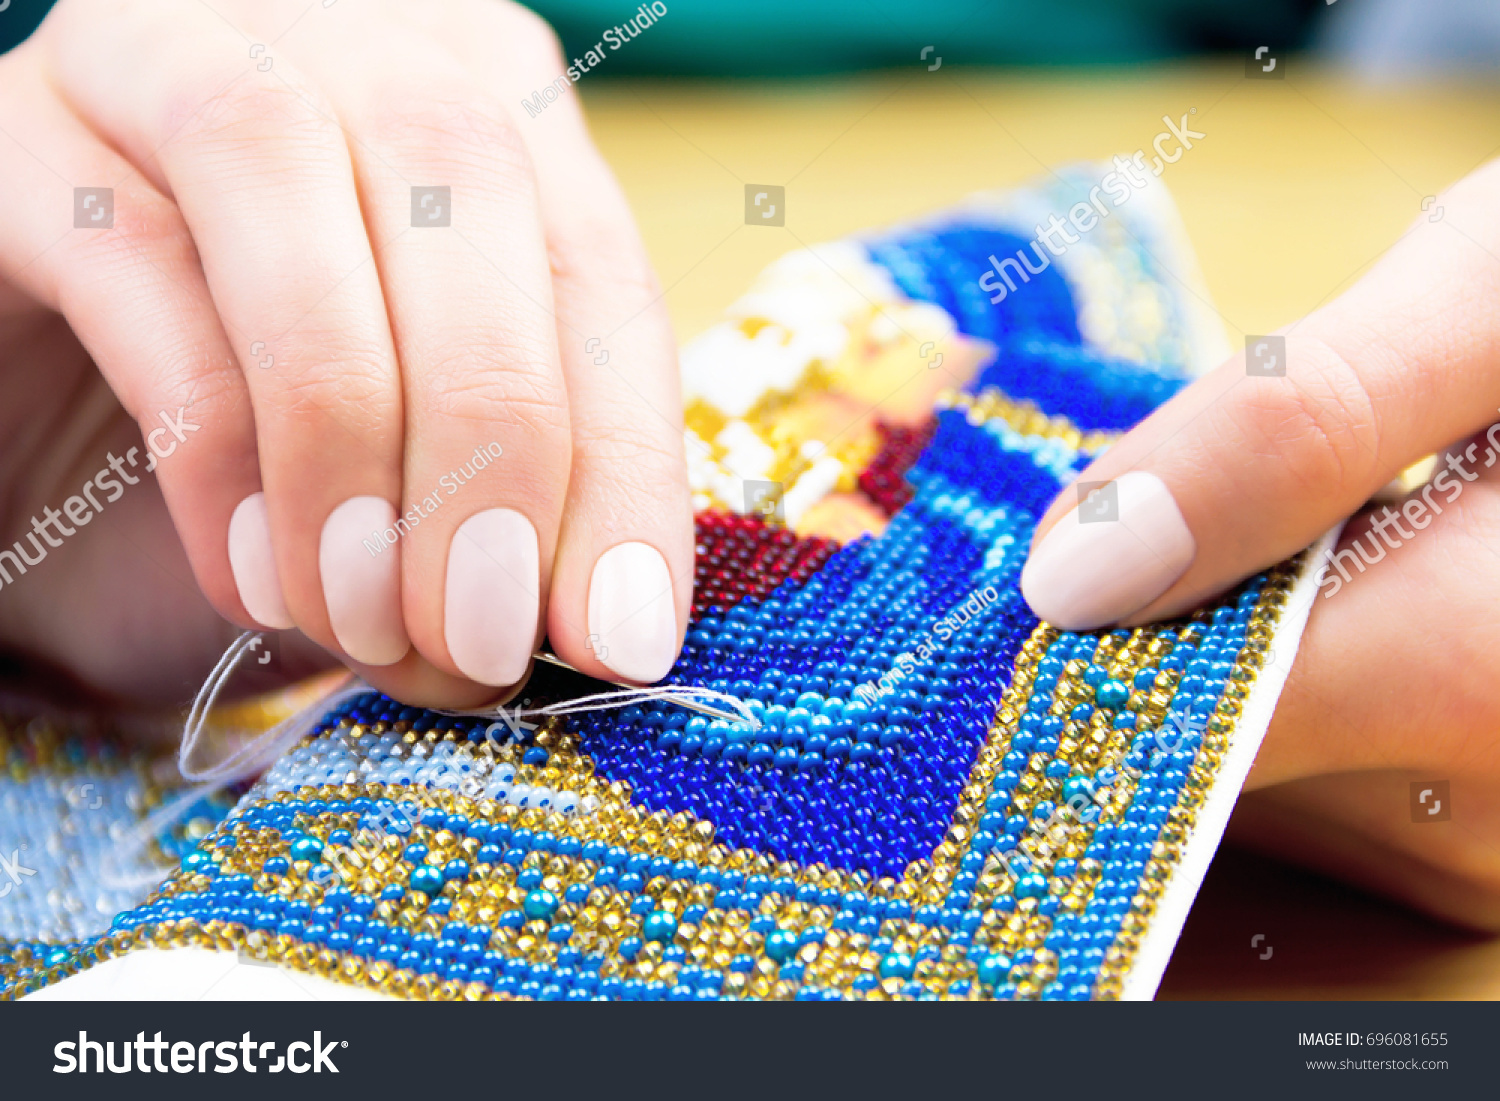 Hands of woman / female / girl bead embroidery ornament towel on wooden background #696081655